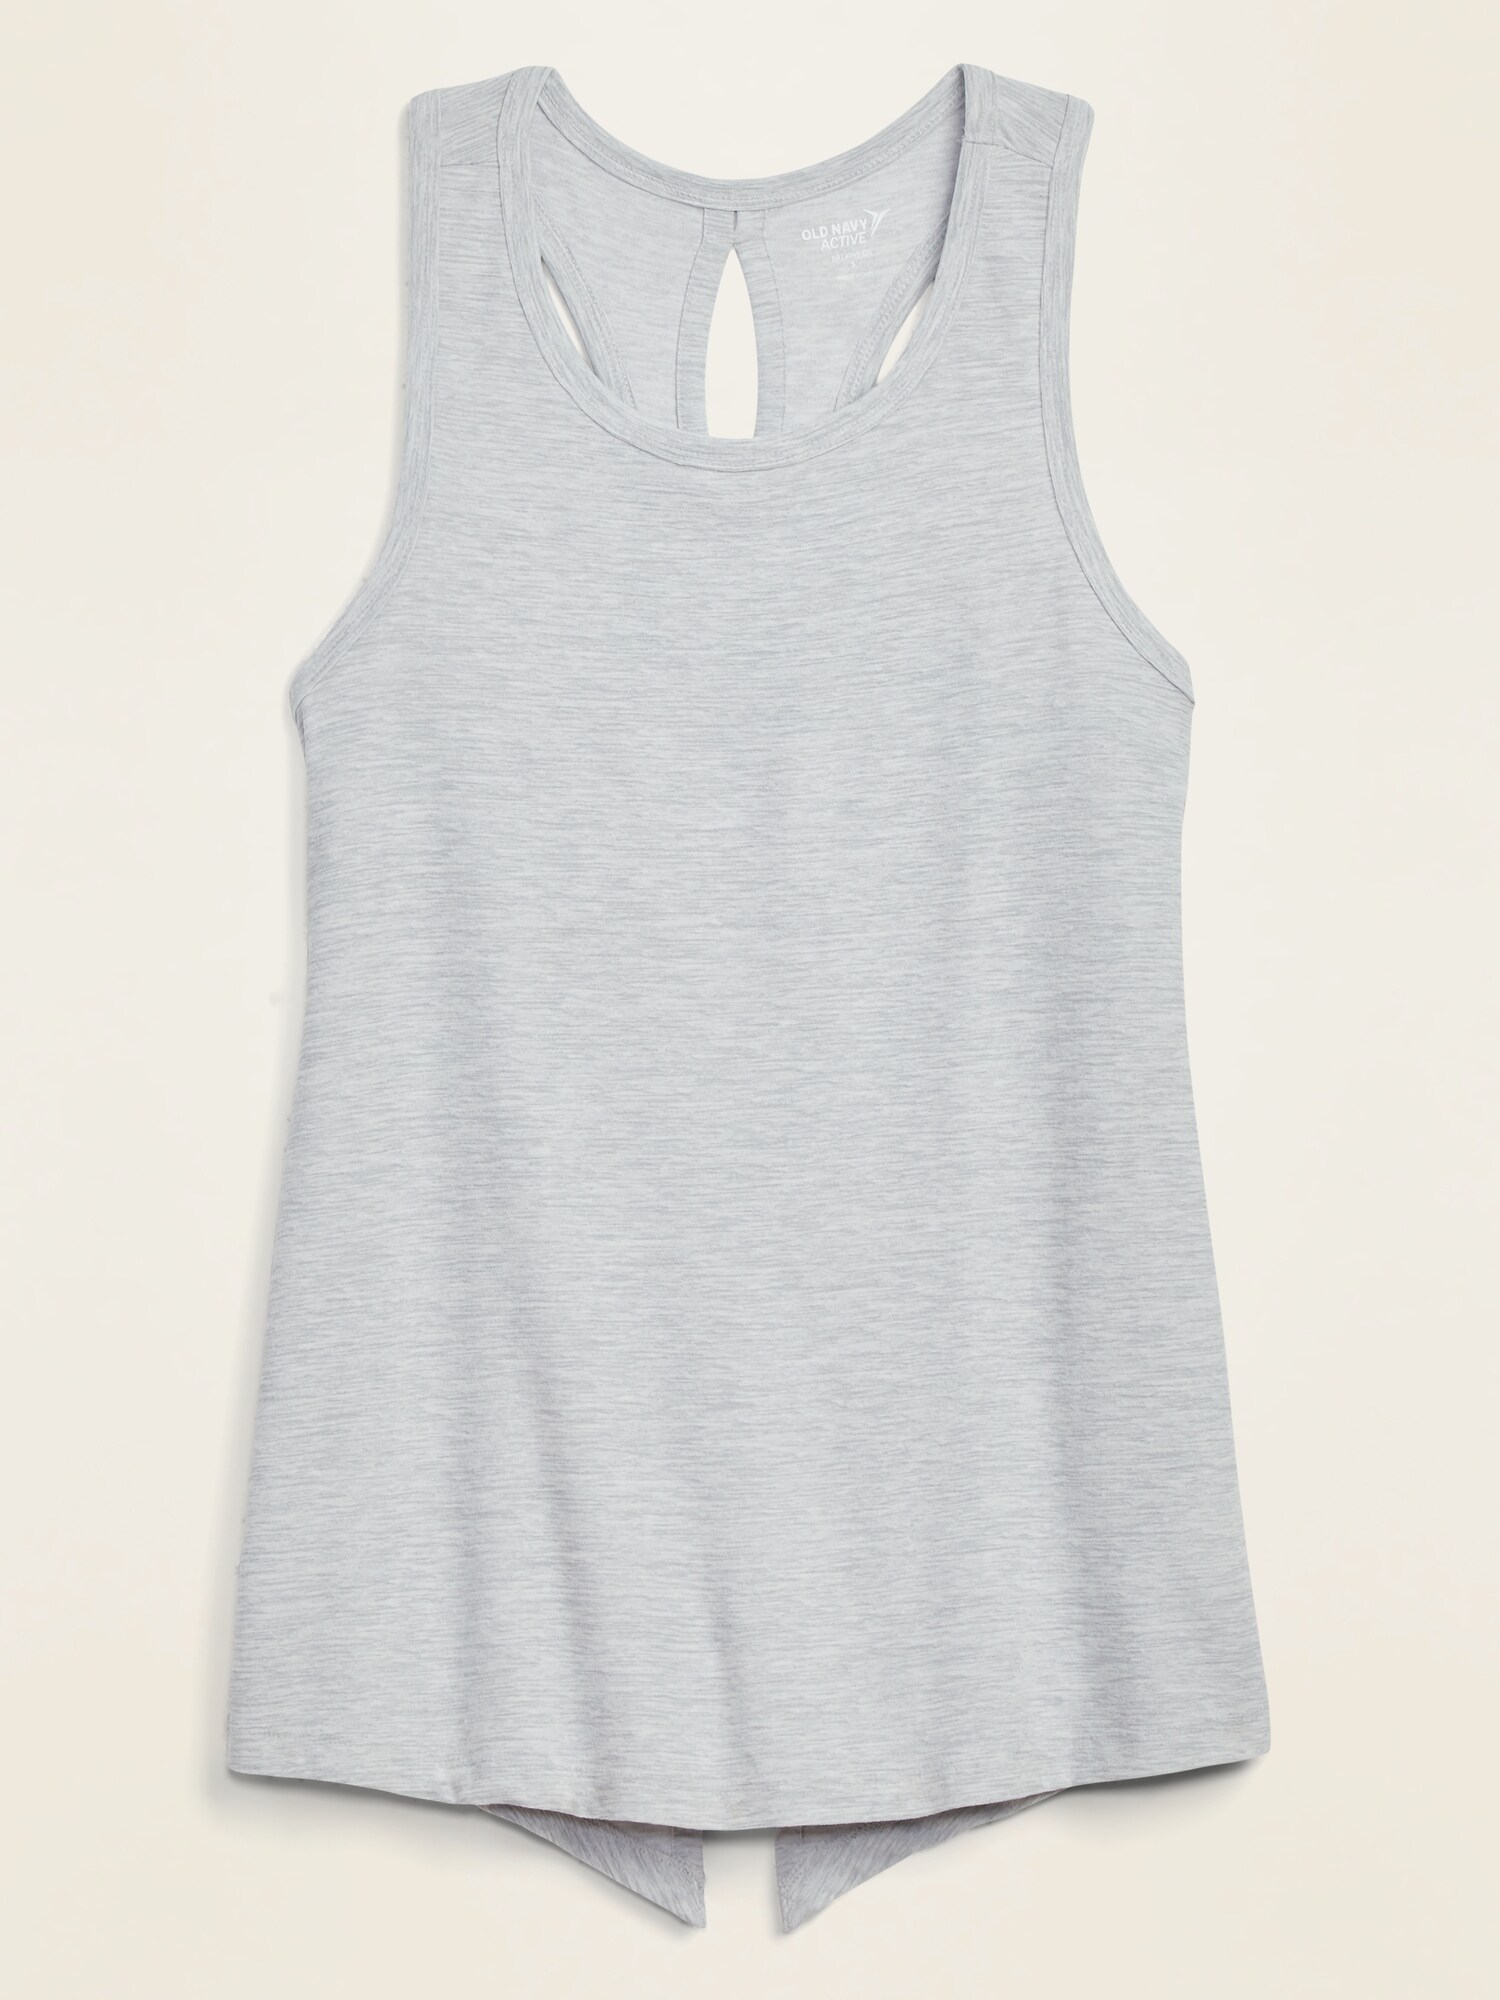 Breathe ON Tie-Back Performance Tank Top for Women